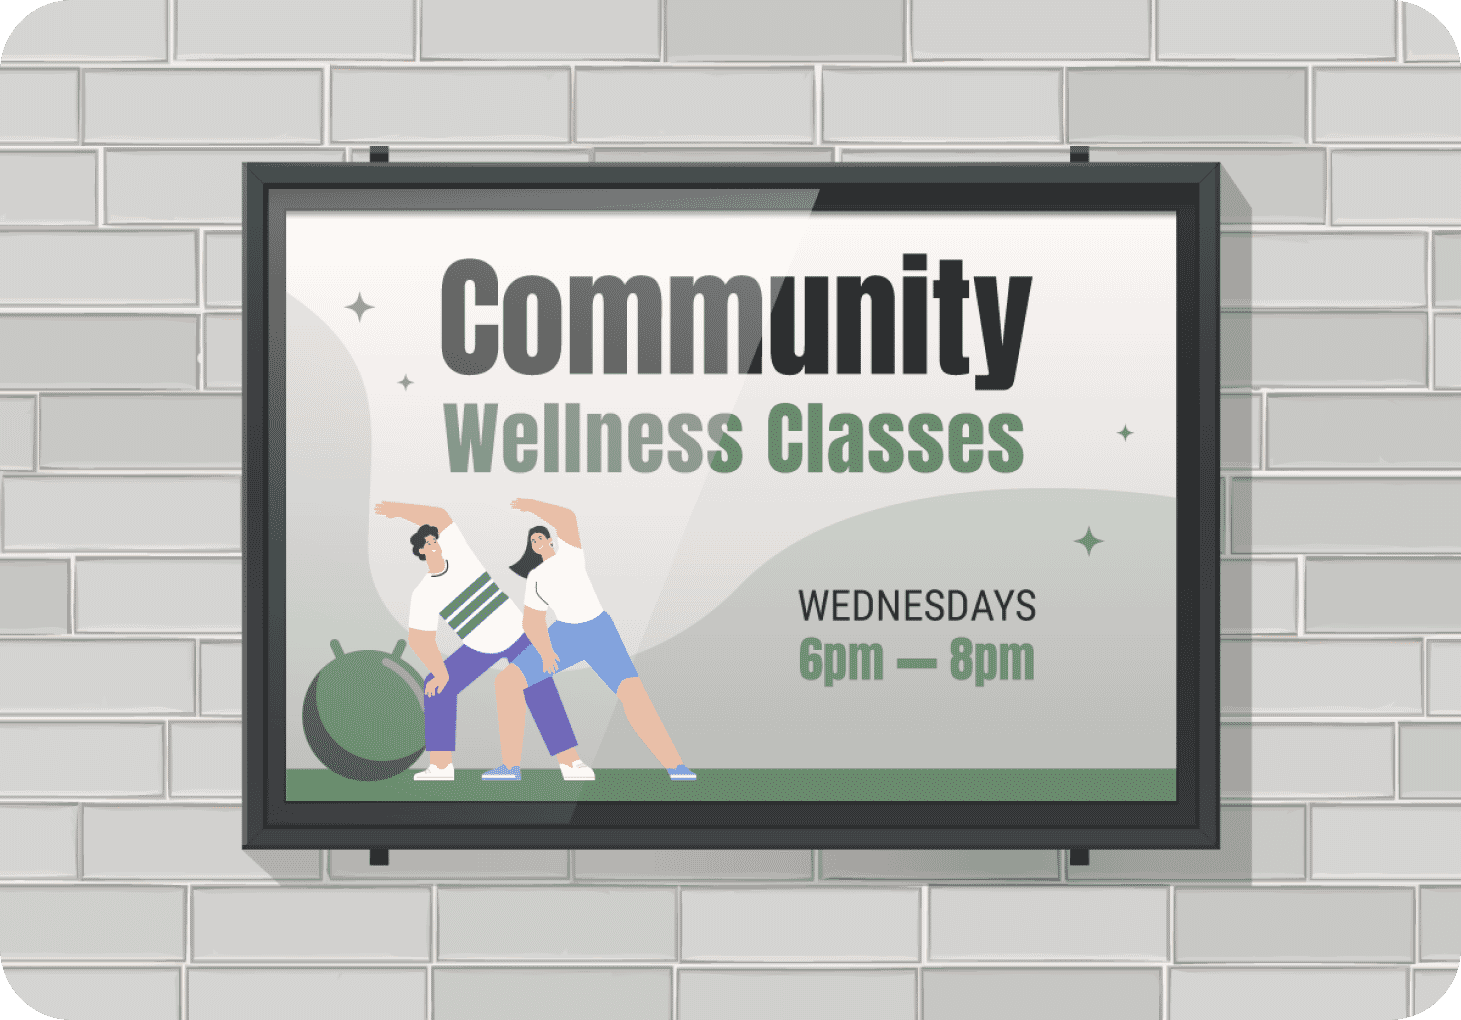 6. Host Community-based Health and Wellness Education Classes